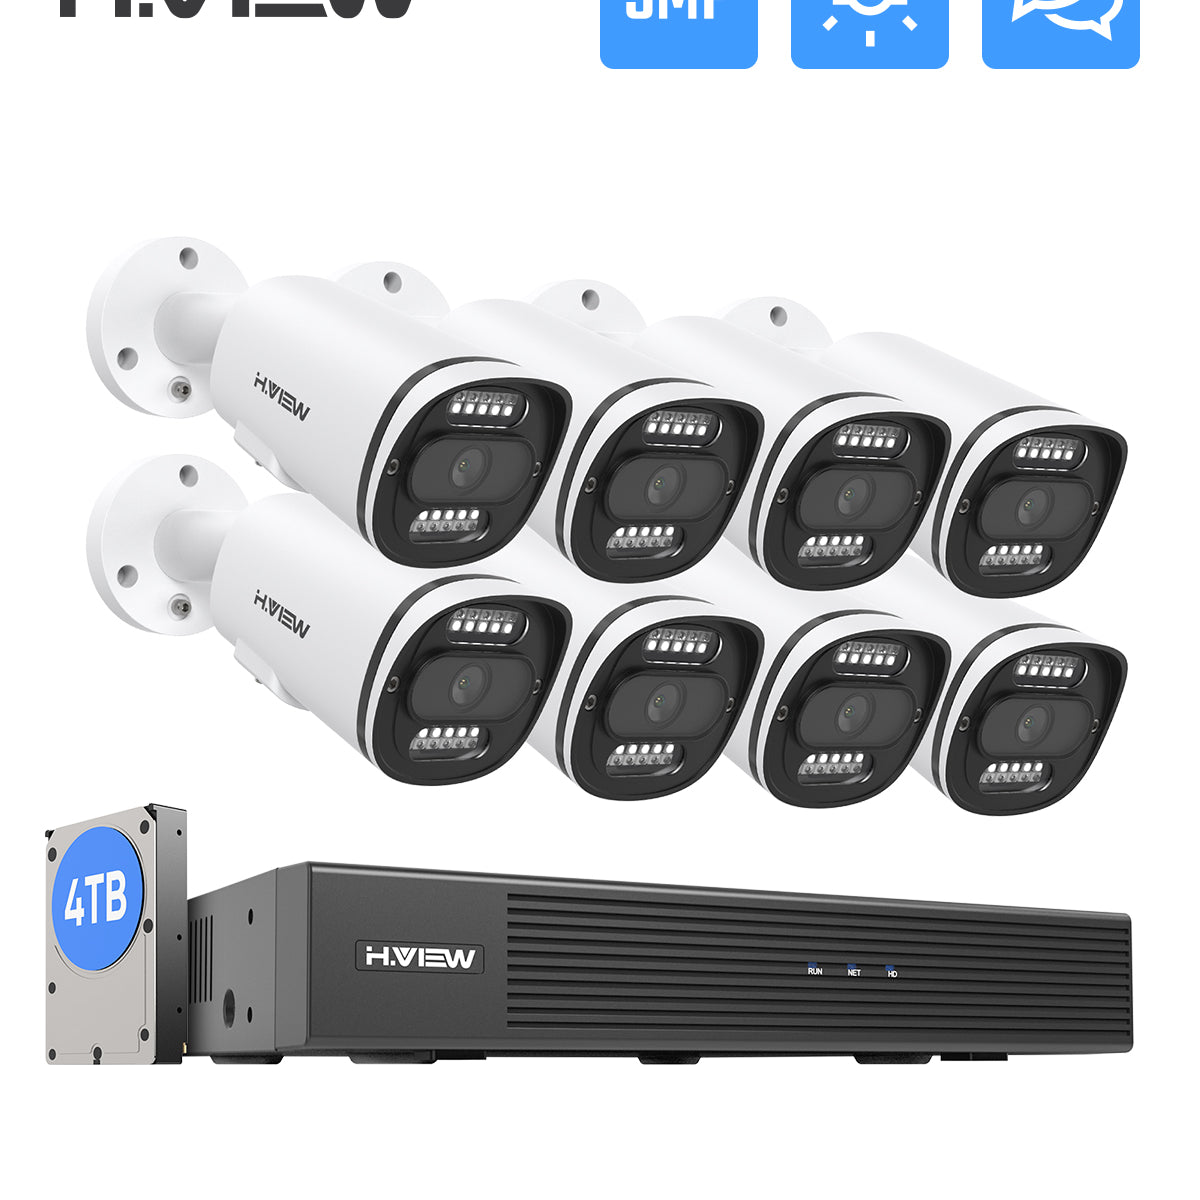 H.VIEW 8 Channels 5MP PoE Security Camera System, Smart Dual 